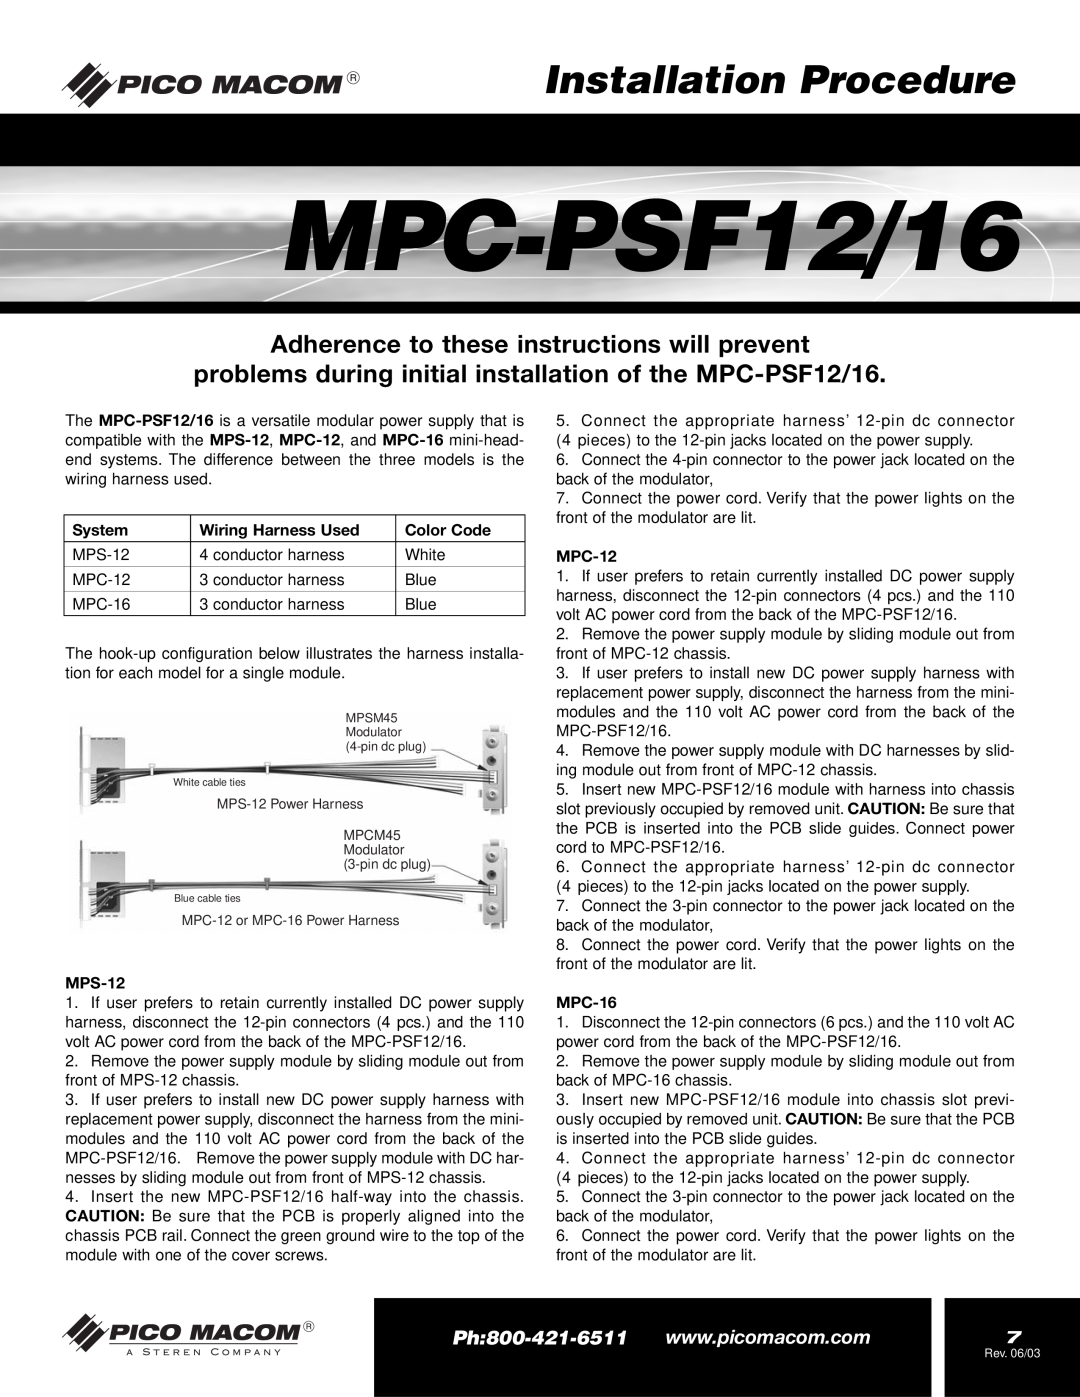 Pico Macom MPC-PSF16 Installation Procedure, MPC-PSF12/16, Adherence to these instructions will prevent, System, MPS-12 